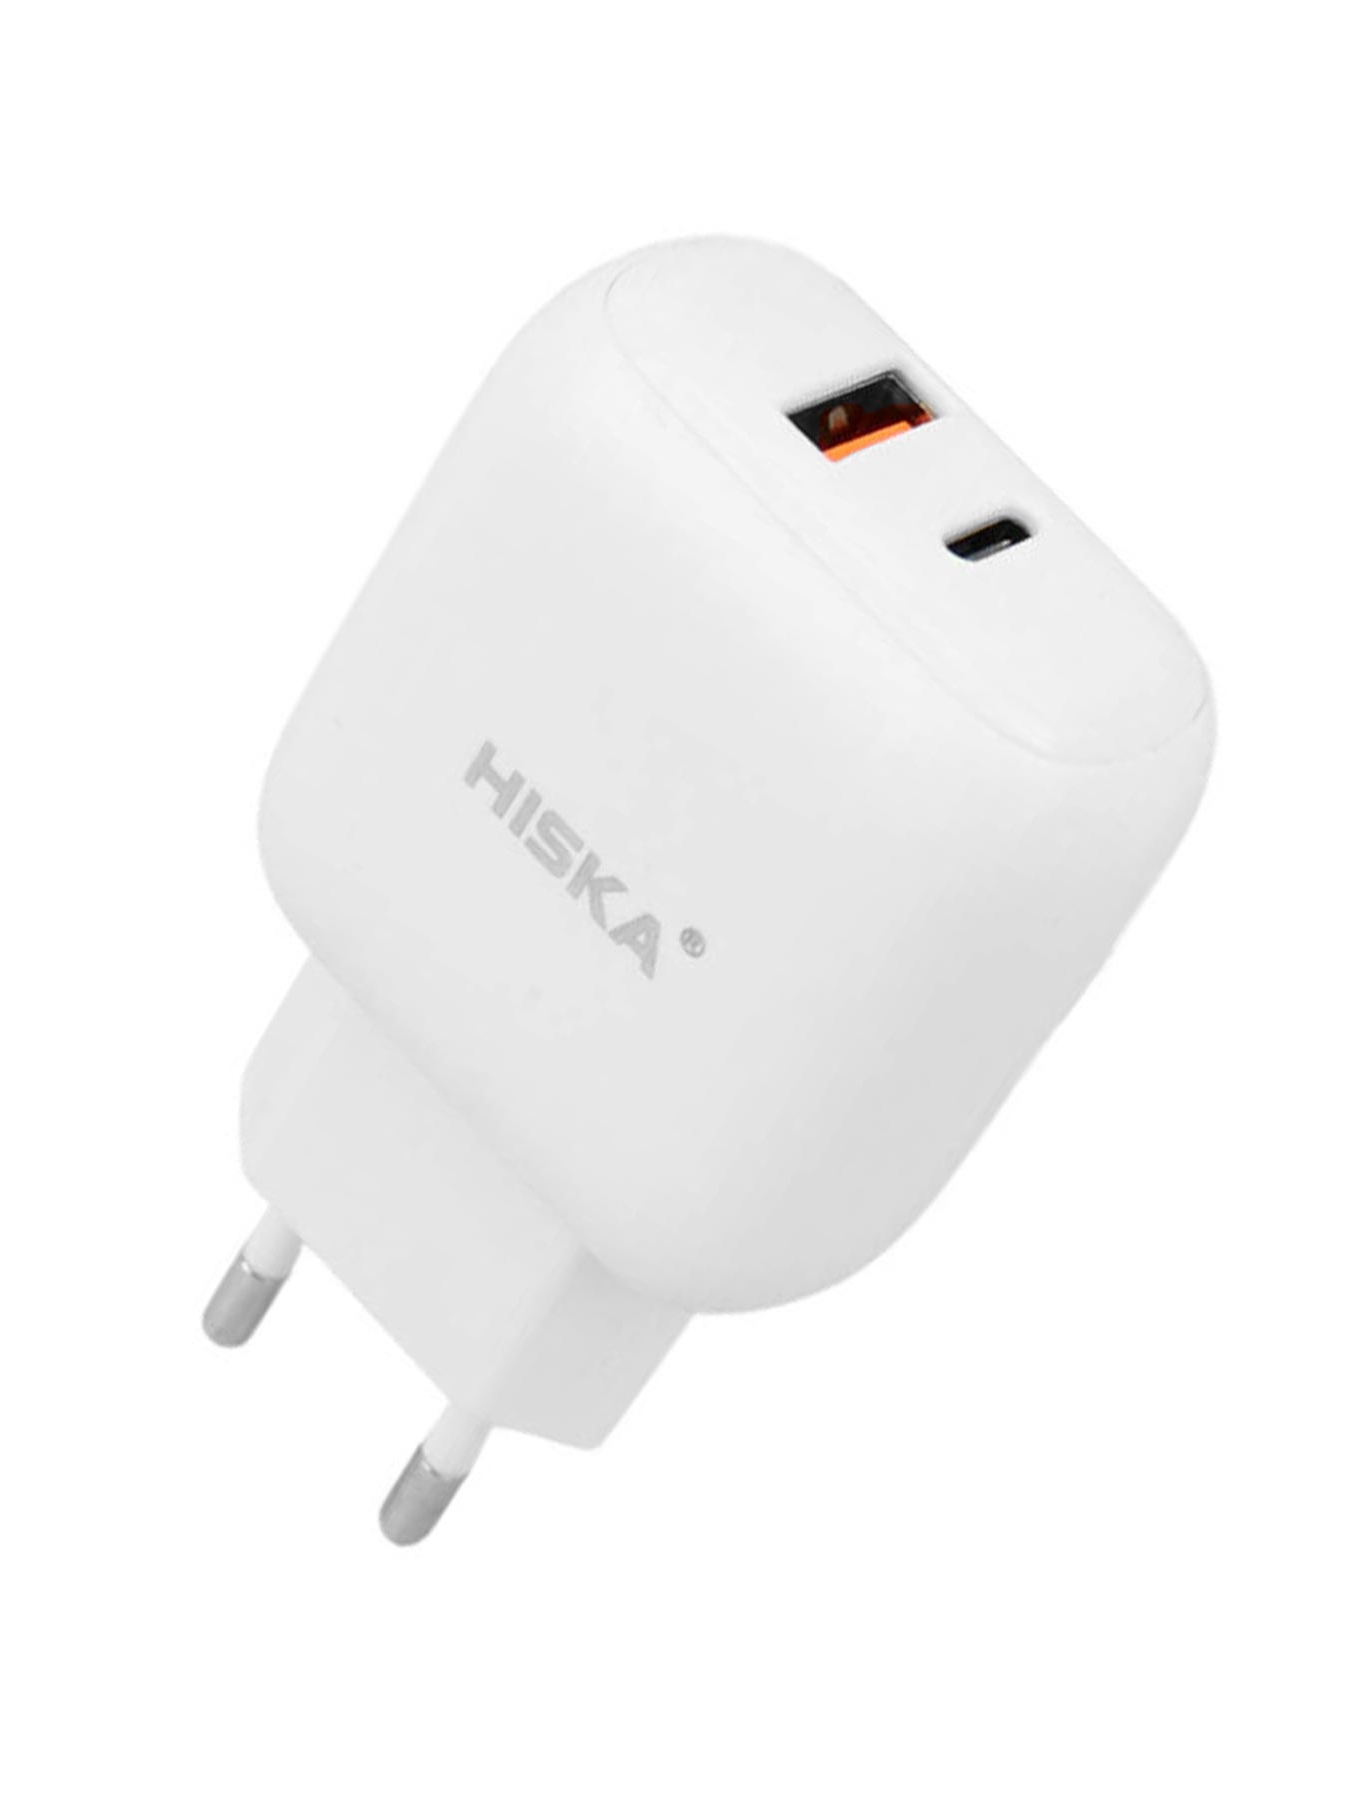 Wall charger H-112PD chargers